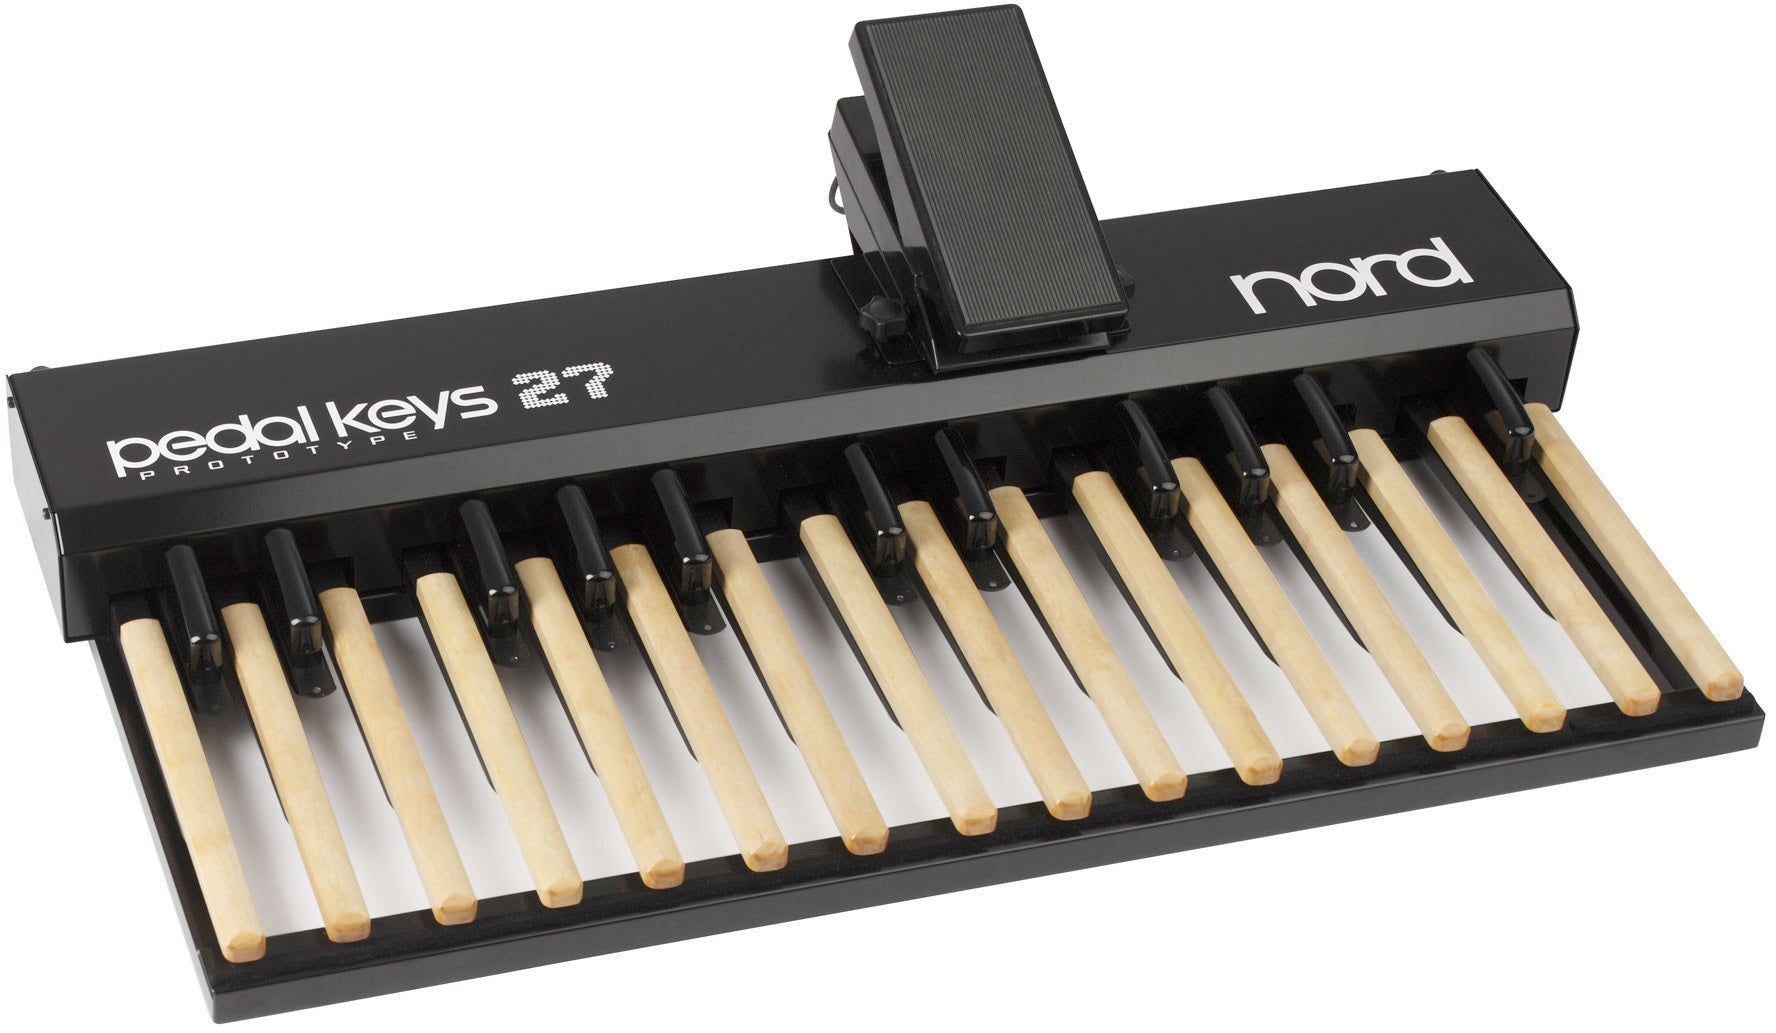 Nord Midi Foot Pedal keyboard 27 note PK27 - L.A. Music - Canada's Favourite Music Store!